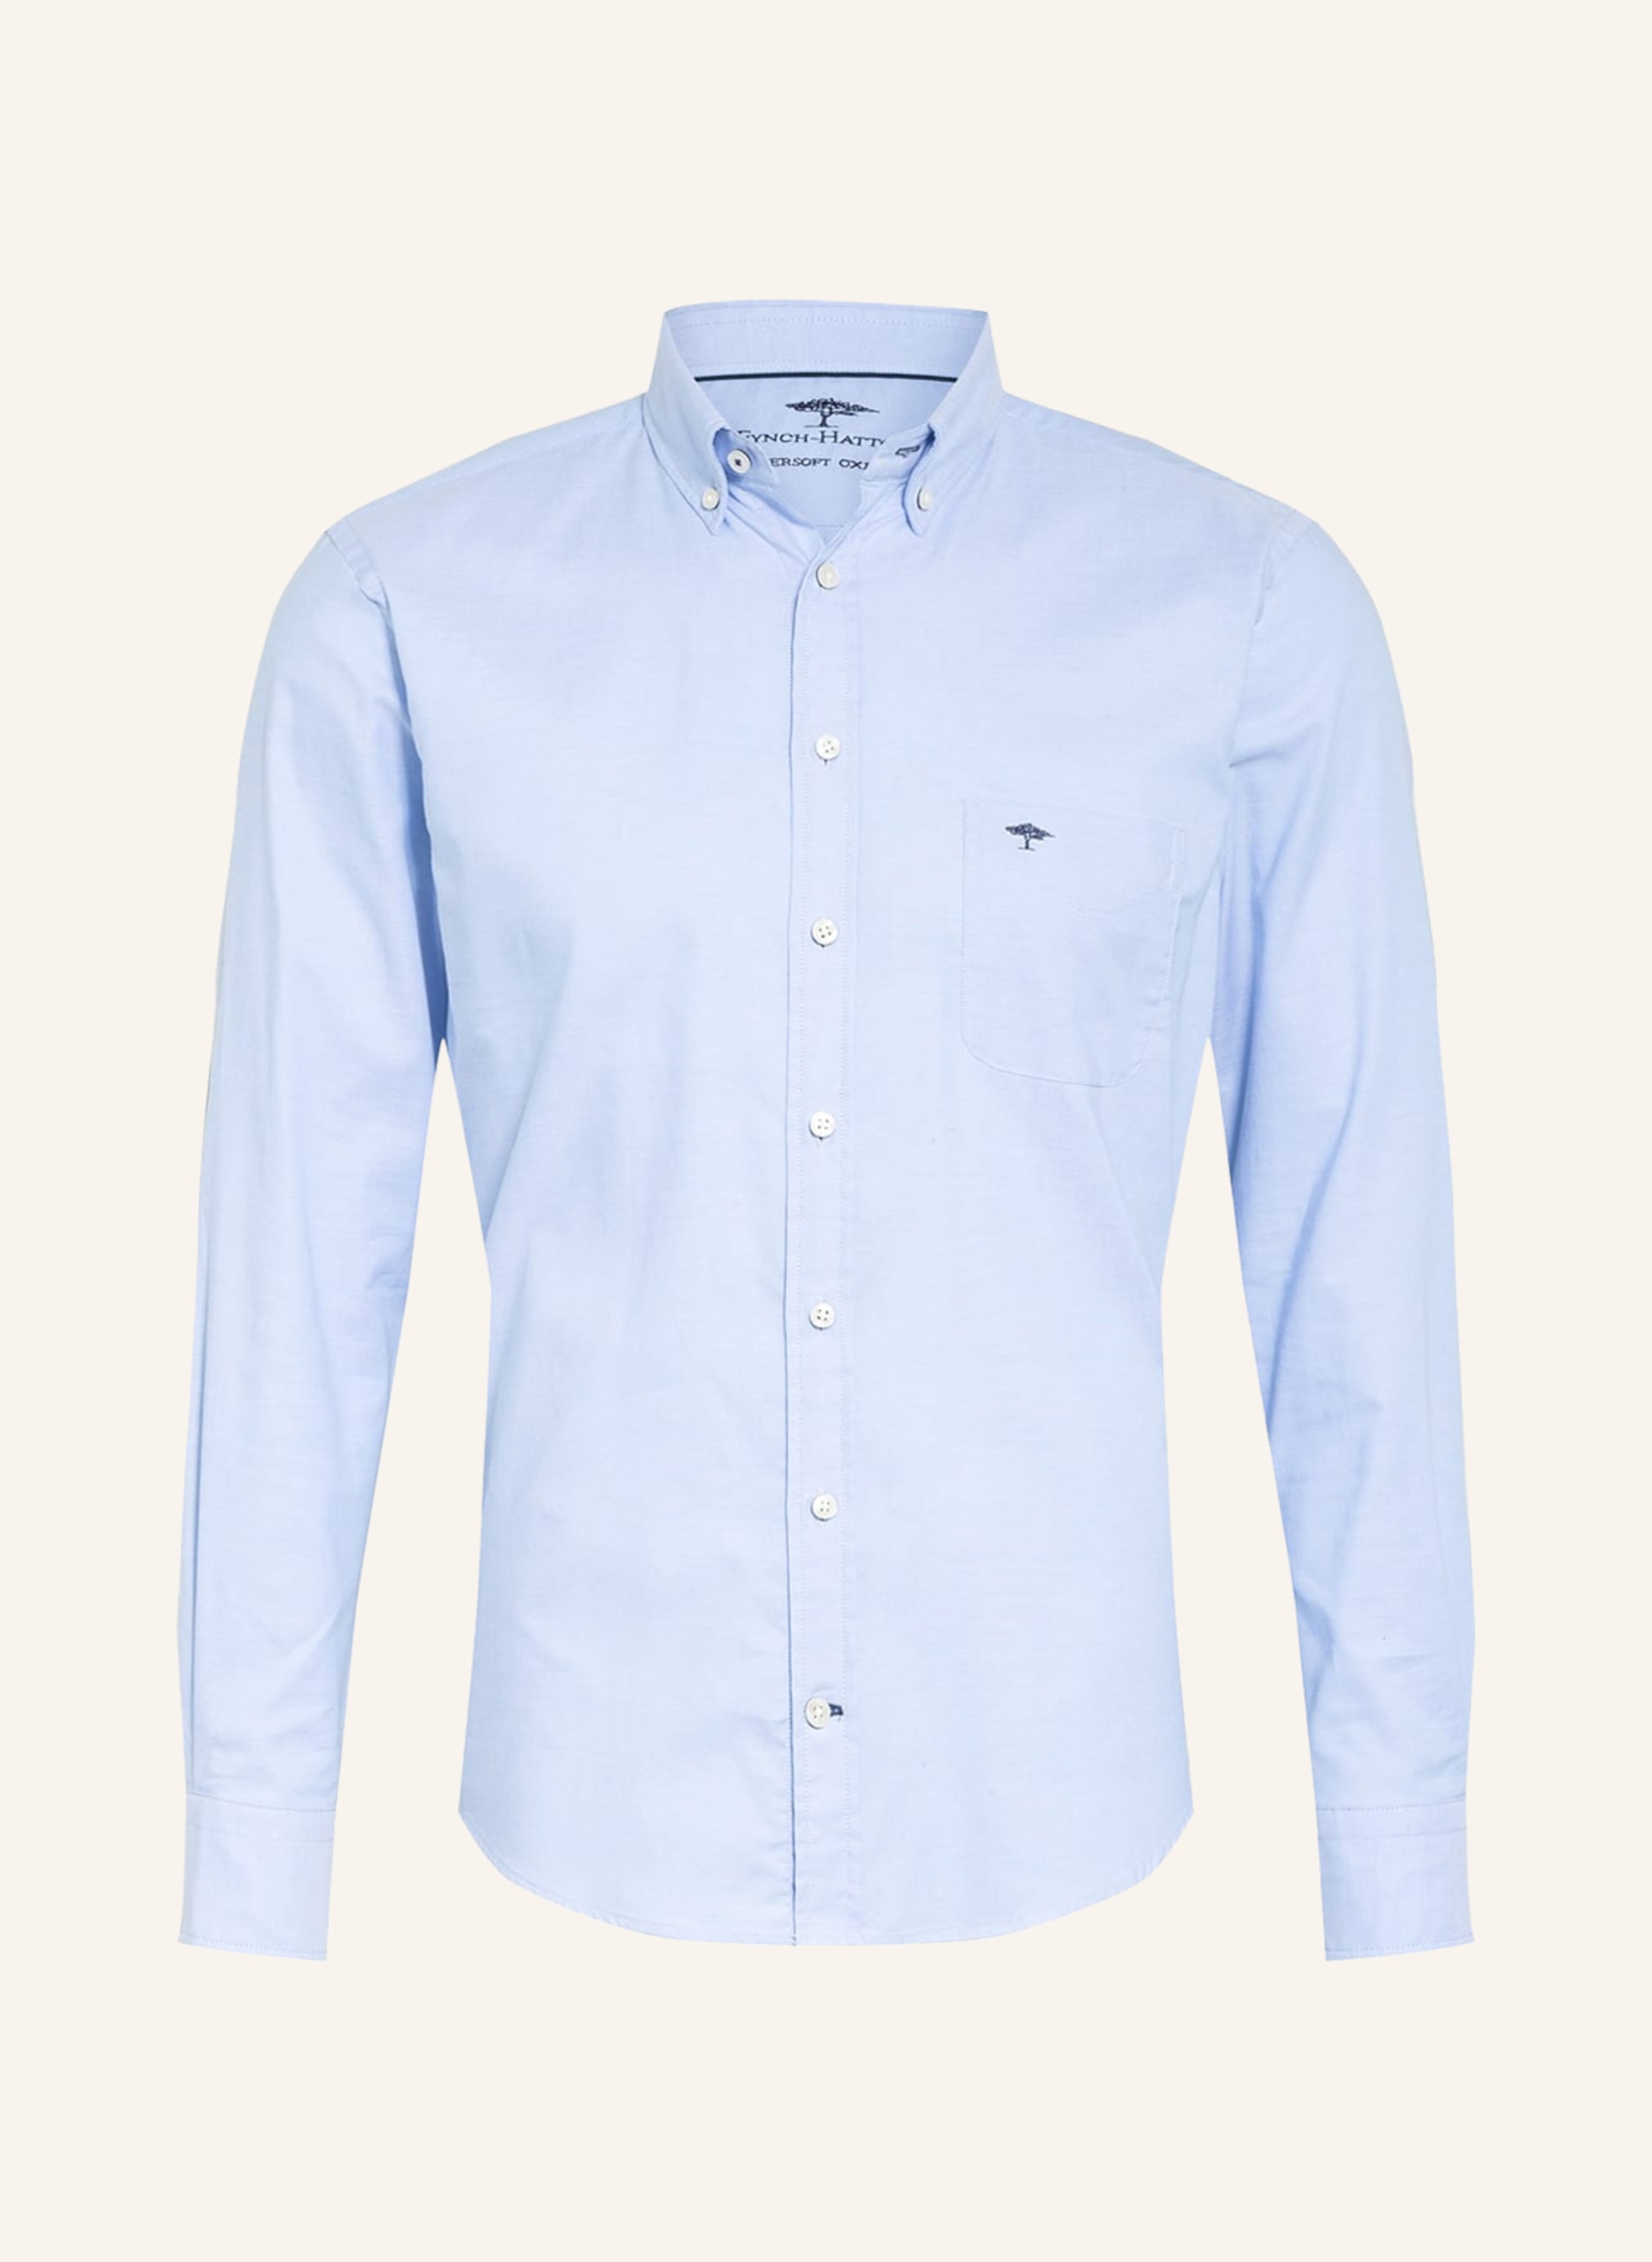 FYNCH-HATTON Shirt casual fit blue in light